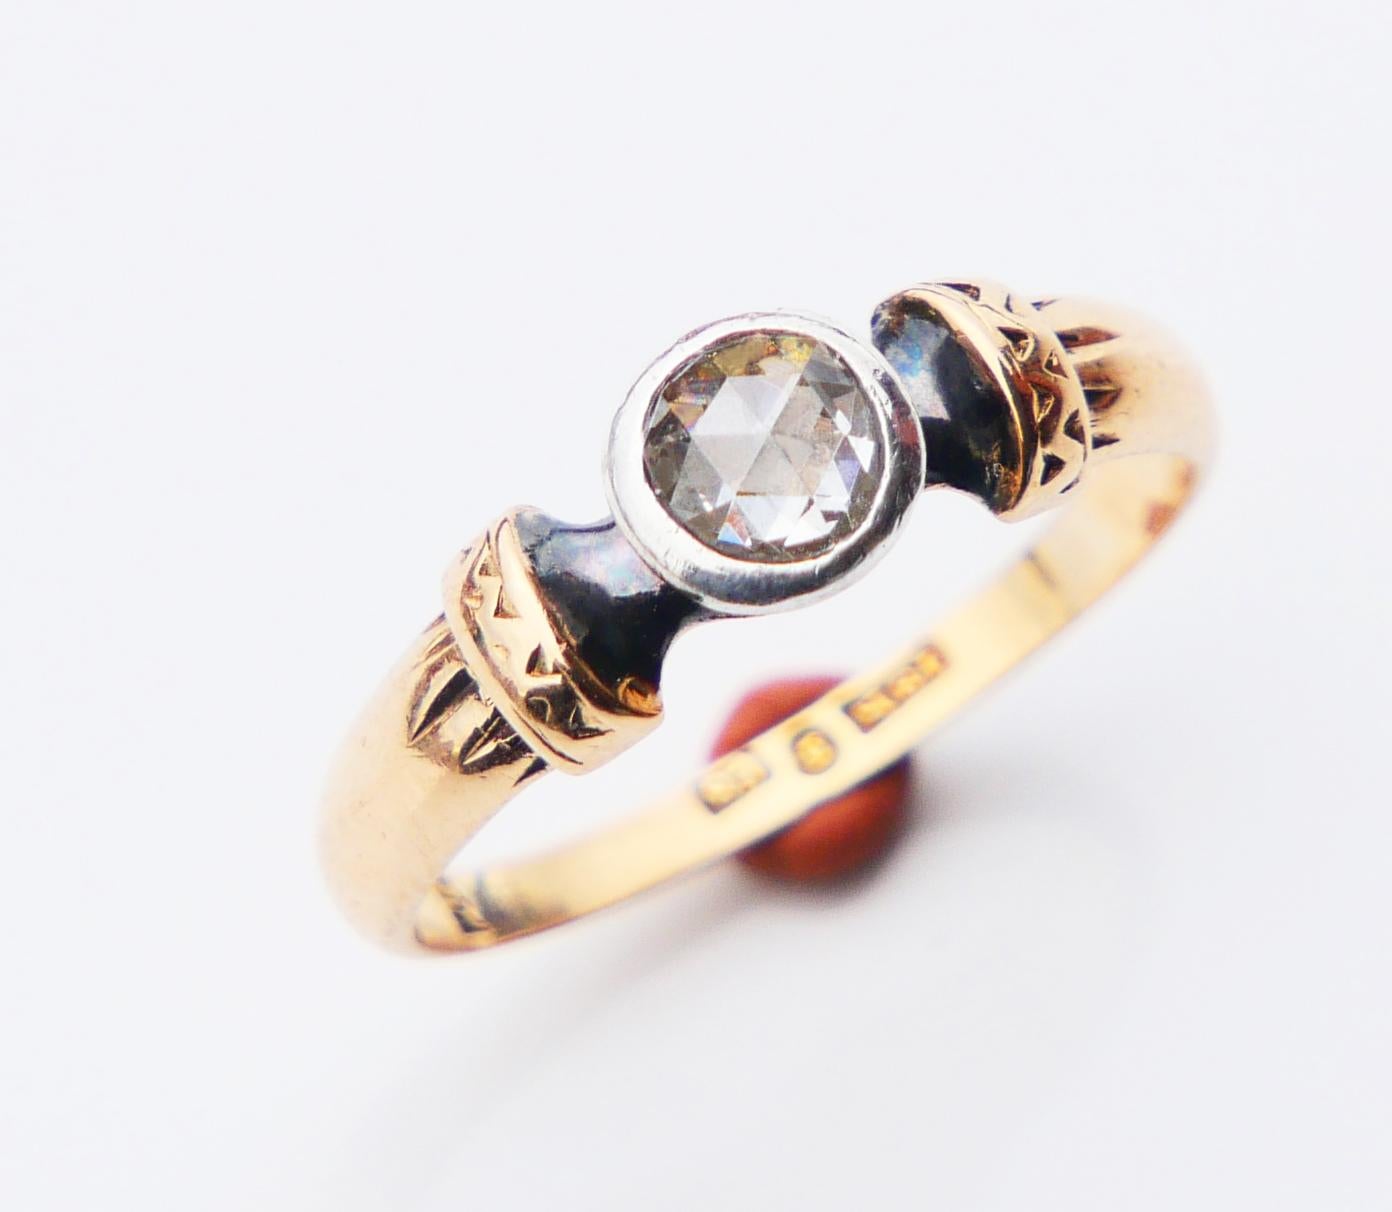 Renaissance-styled ring featuring solid 18K Orange - Yellow Gold band with articulated shoulders. Natural rose cut Diamond in Silver bezel measures Ø 4.5 mm x 1.7 mm deep / about 0.45 ct. Color ca. I, J / SI Stone has the back side open.

Swedish